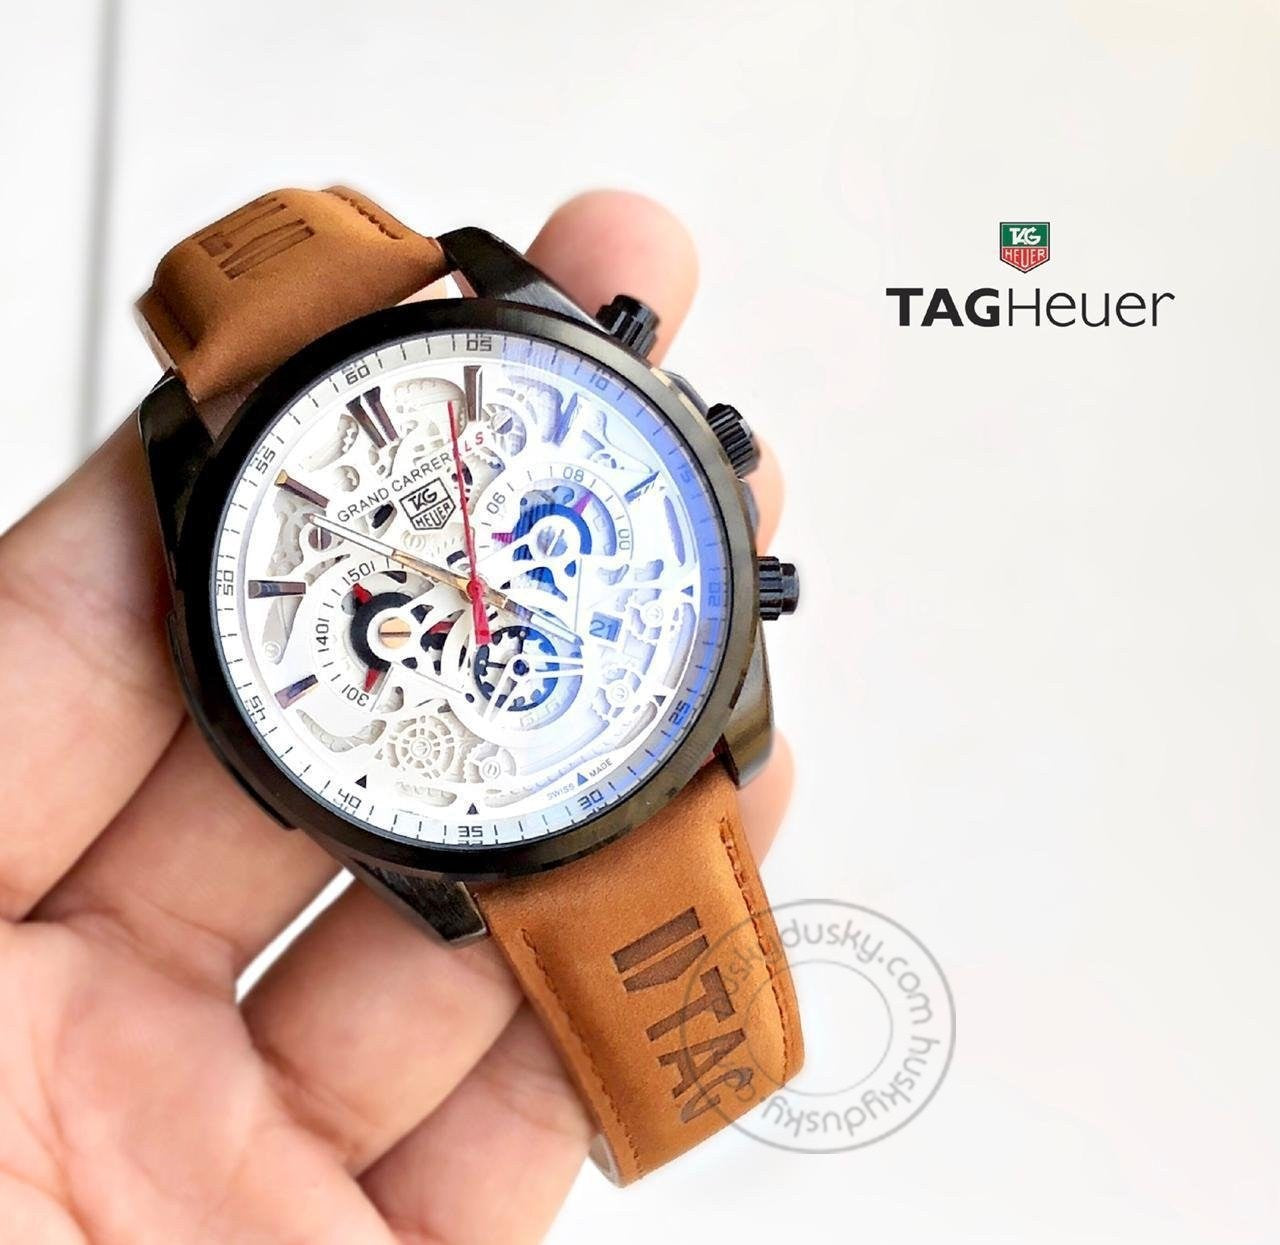 Tag Heuer CR7 Diagno Brown Tan Chronograph Multi Dial Leather Mens CAR2110-TAN Watch for Man - Gift